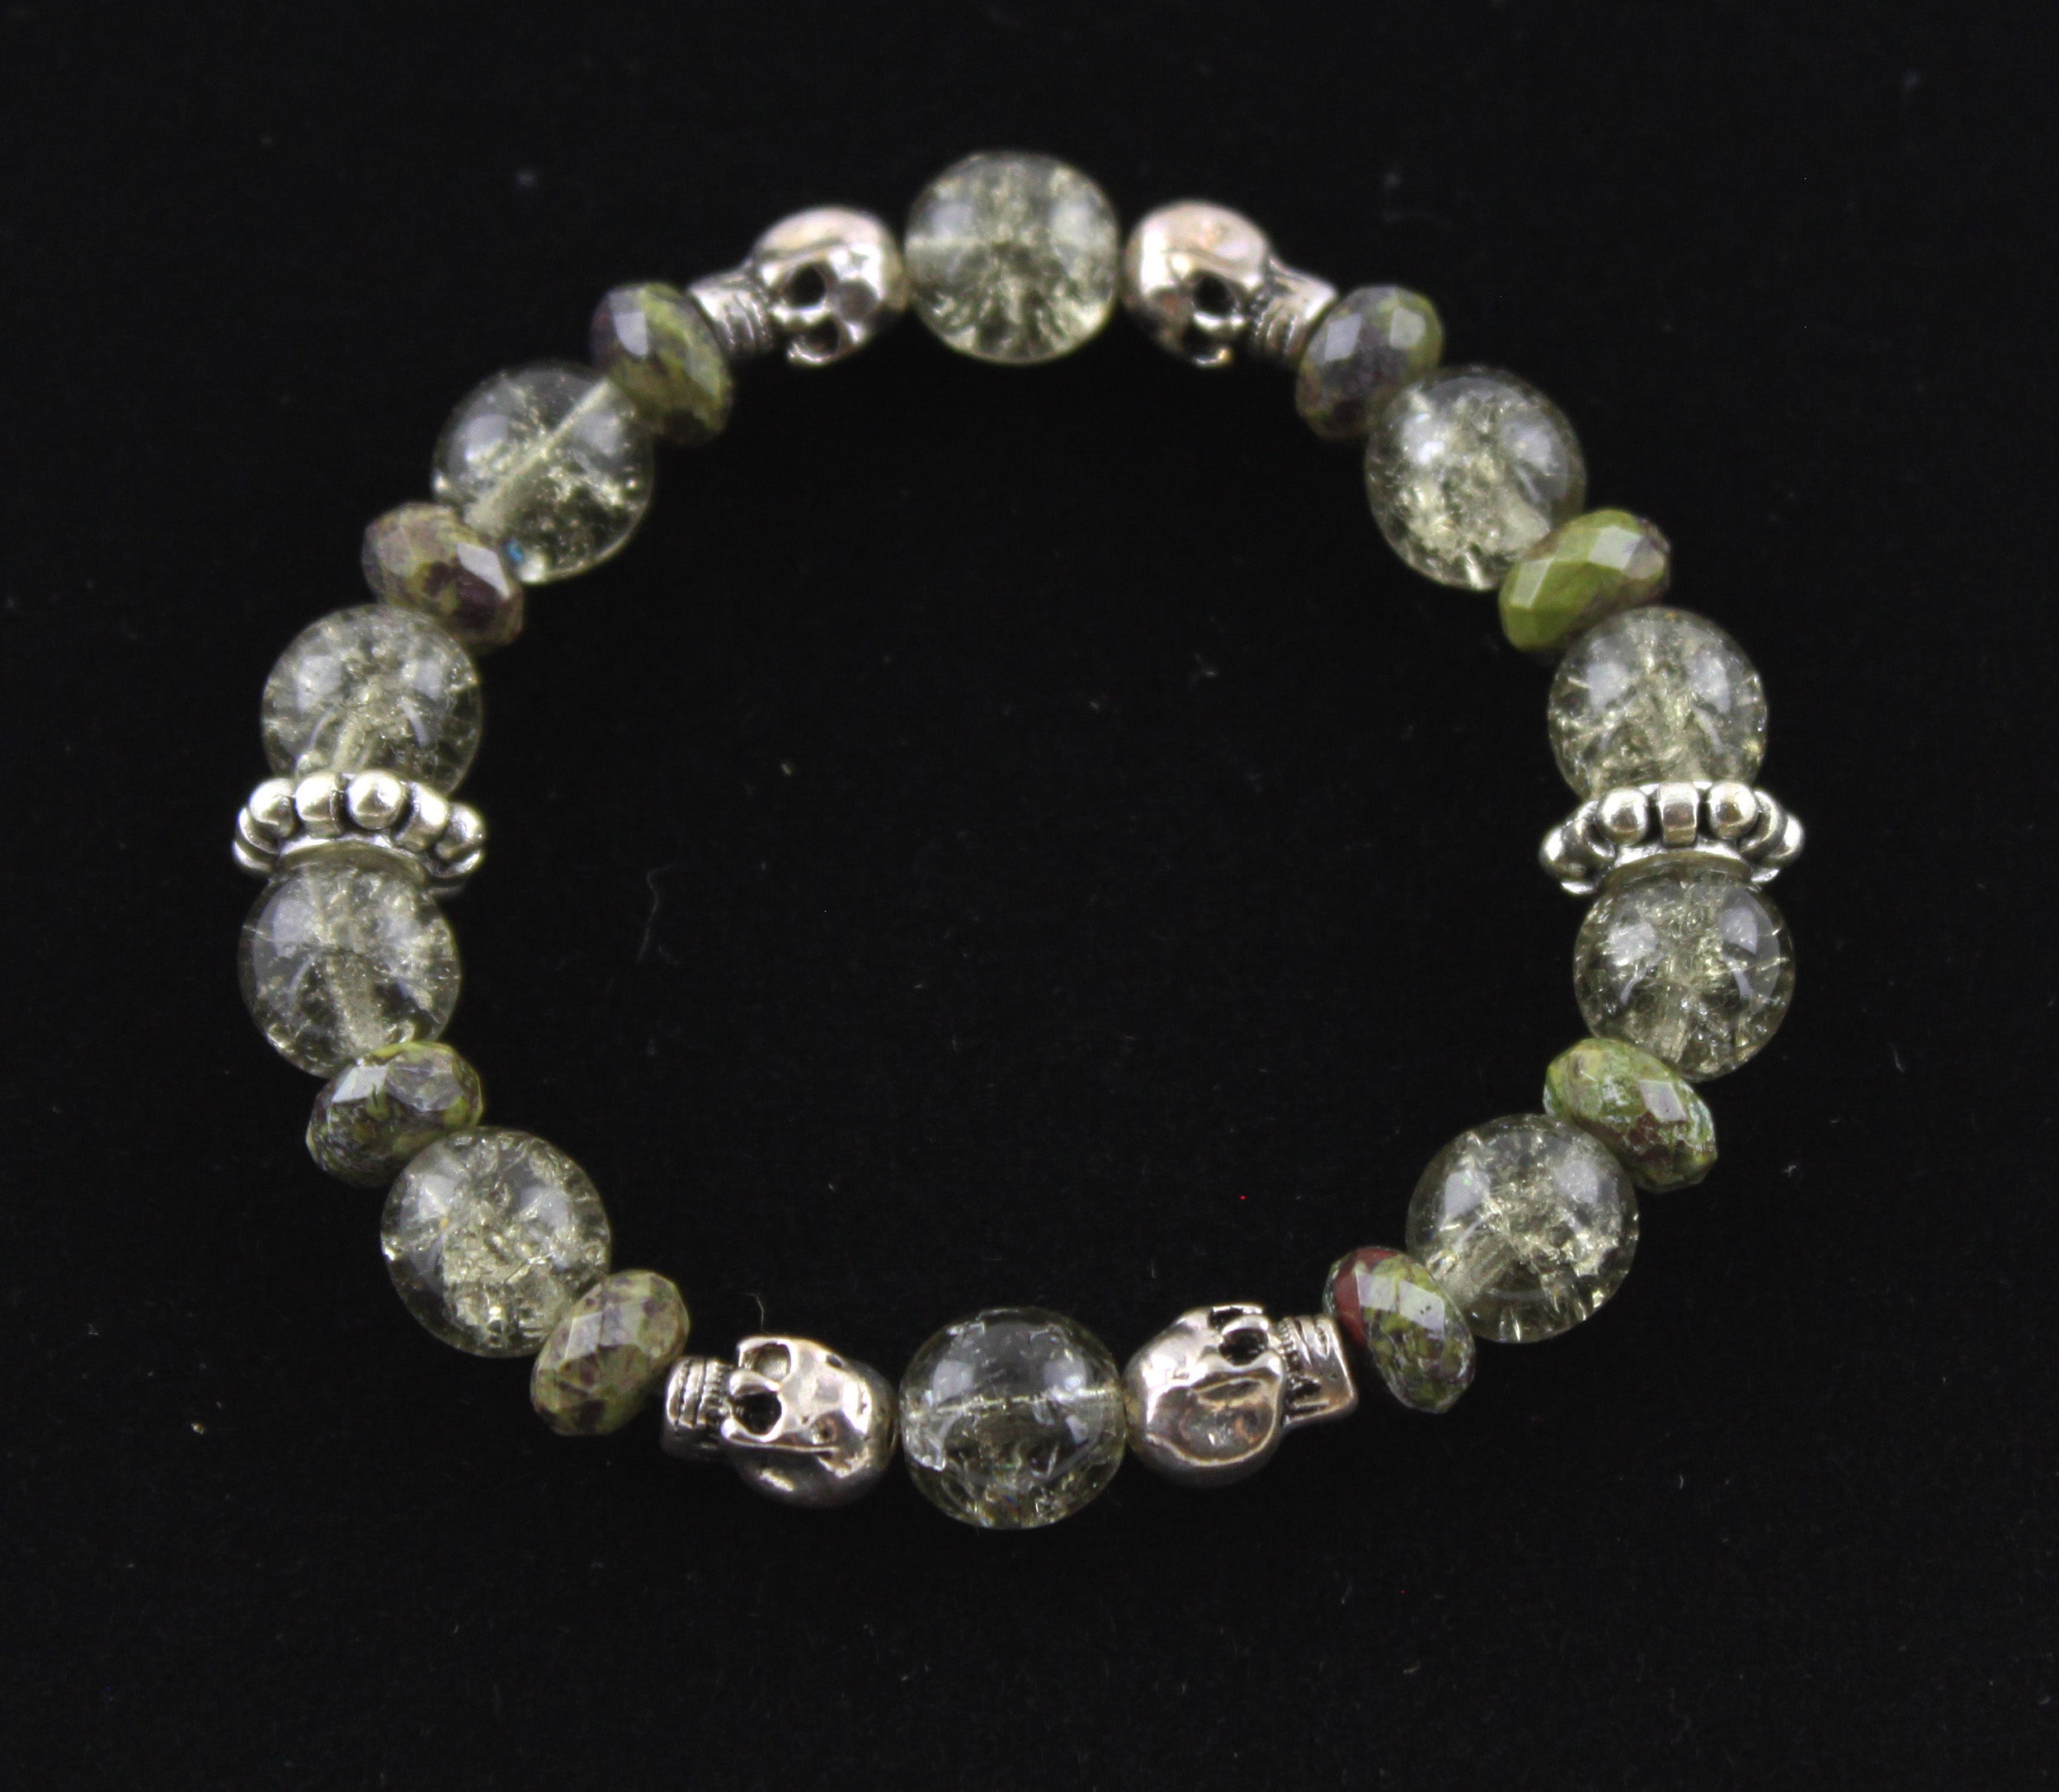 Shades of Silver and Grey Skull Bracelet with Dragon Blood Jasper Accents